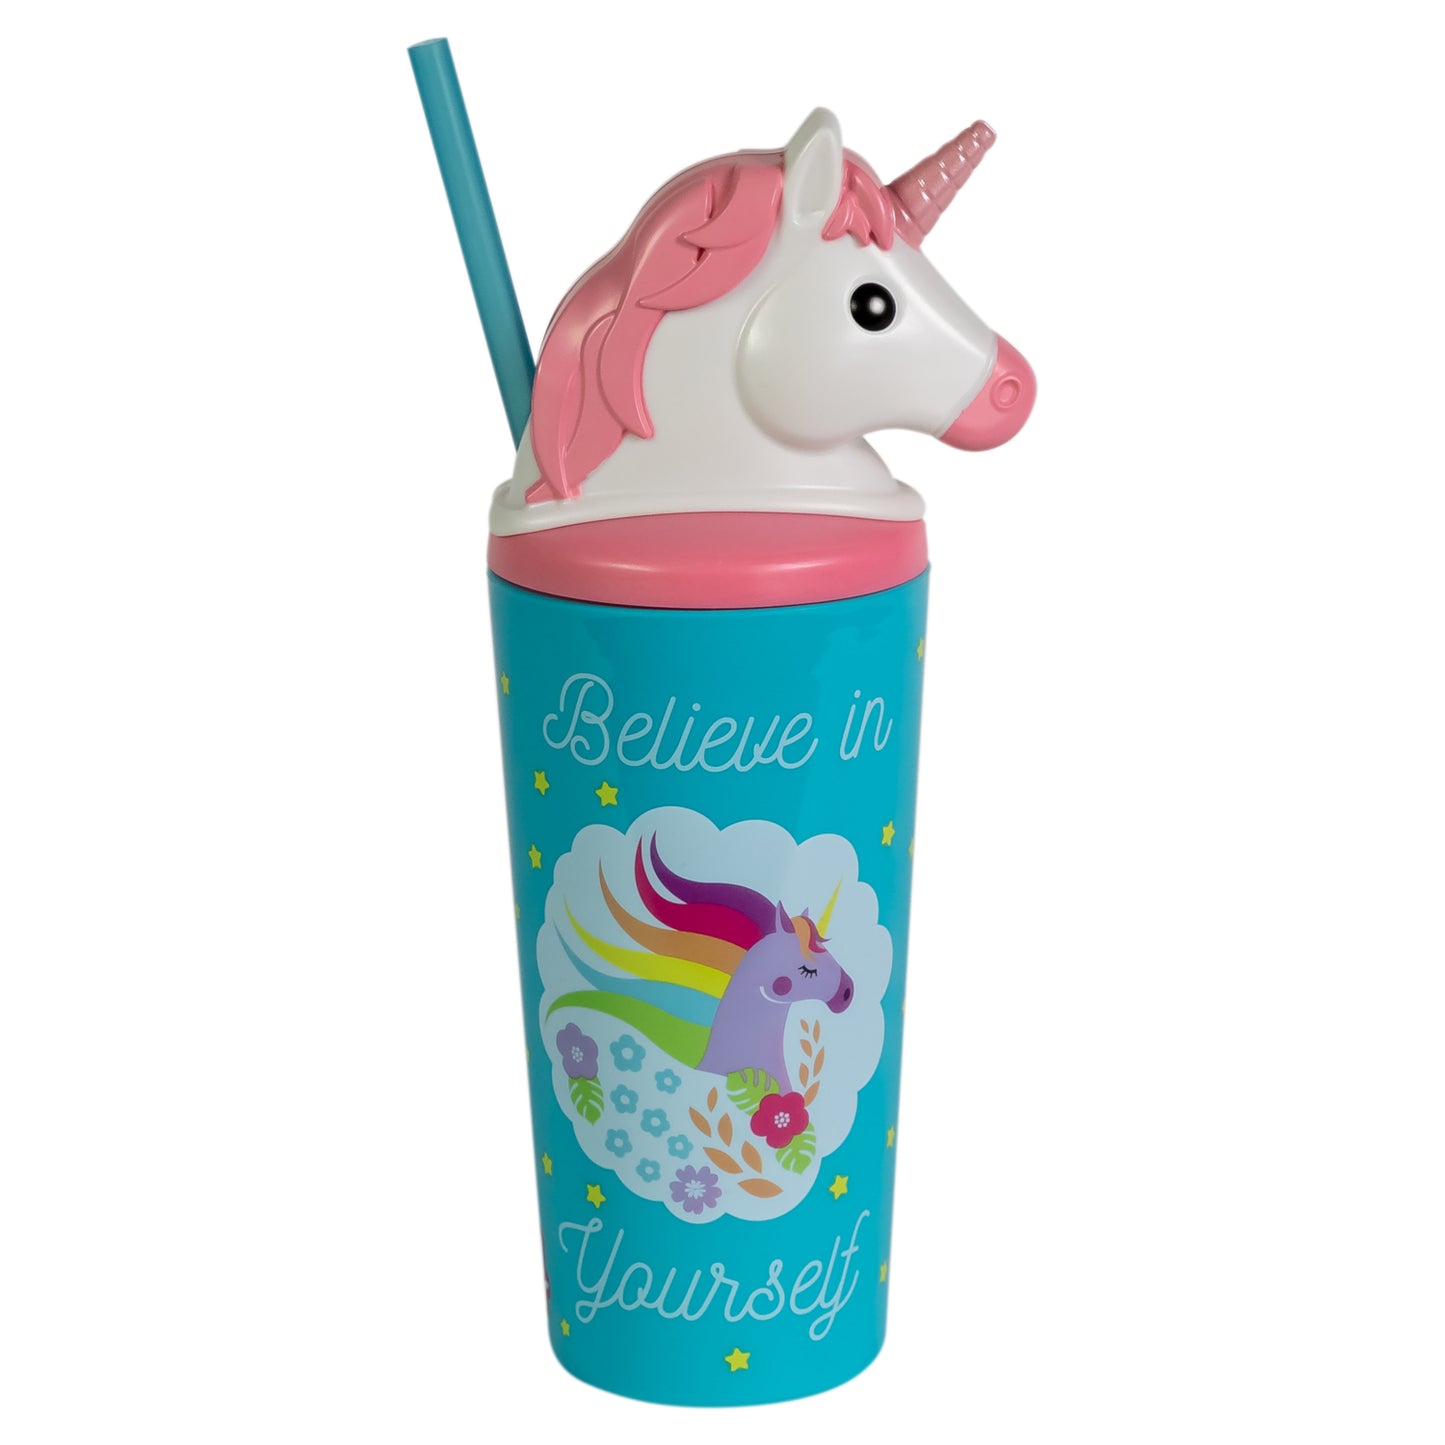 Cool Gear 4-Pack 18 oz Fun Toppers Unicorn Character Lid Tumblers with straw included | Durable, Reusable Water Bottle Gift for Kids, Adults